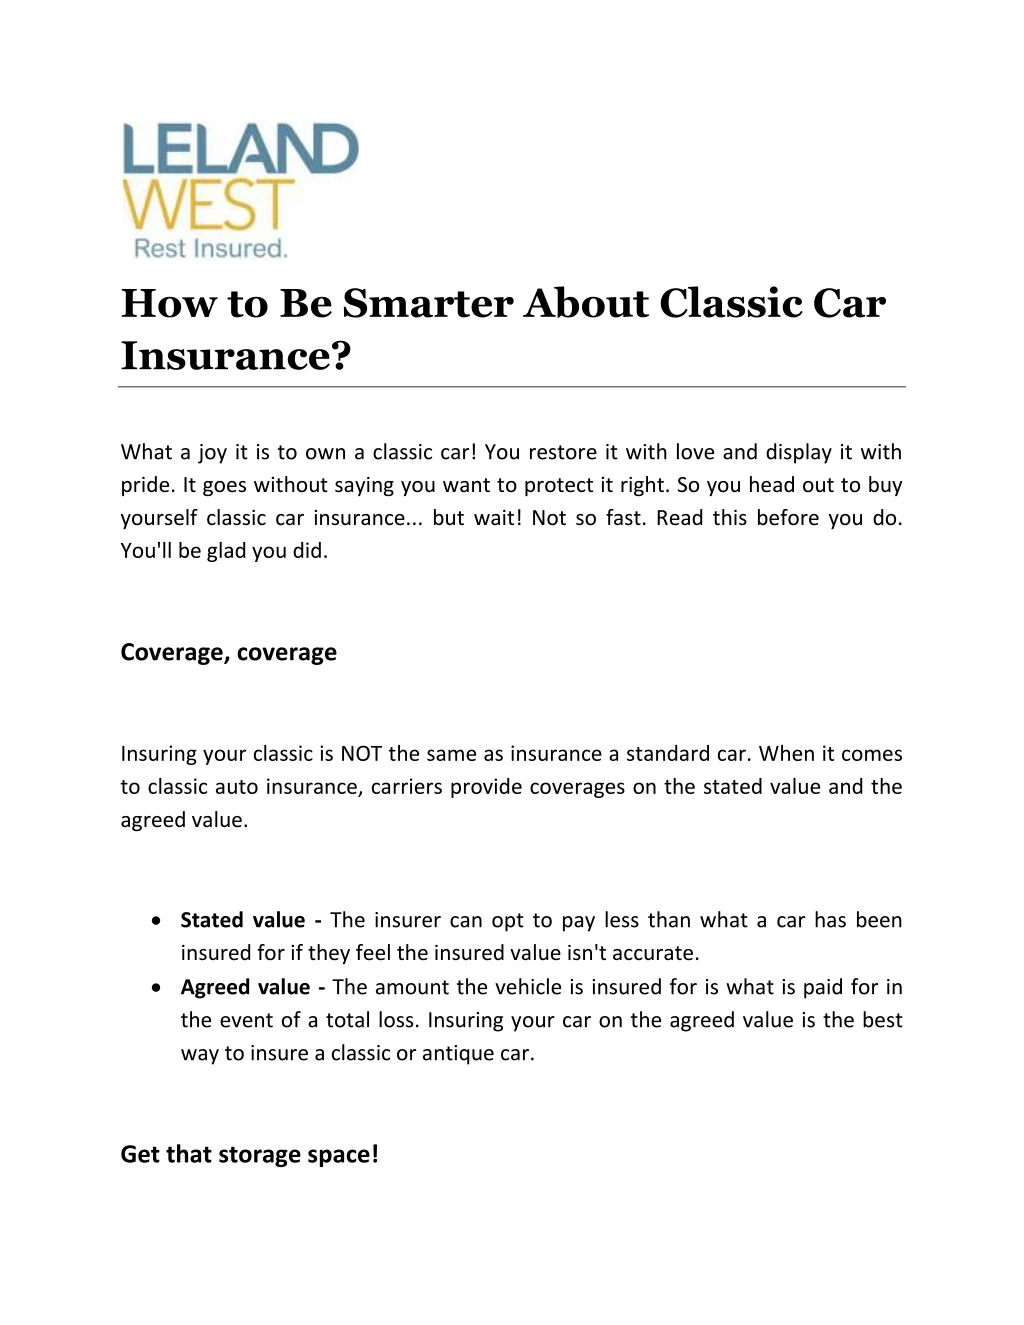 how to be smarter about classic car insurance